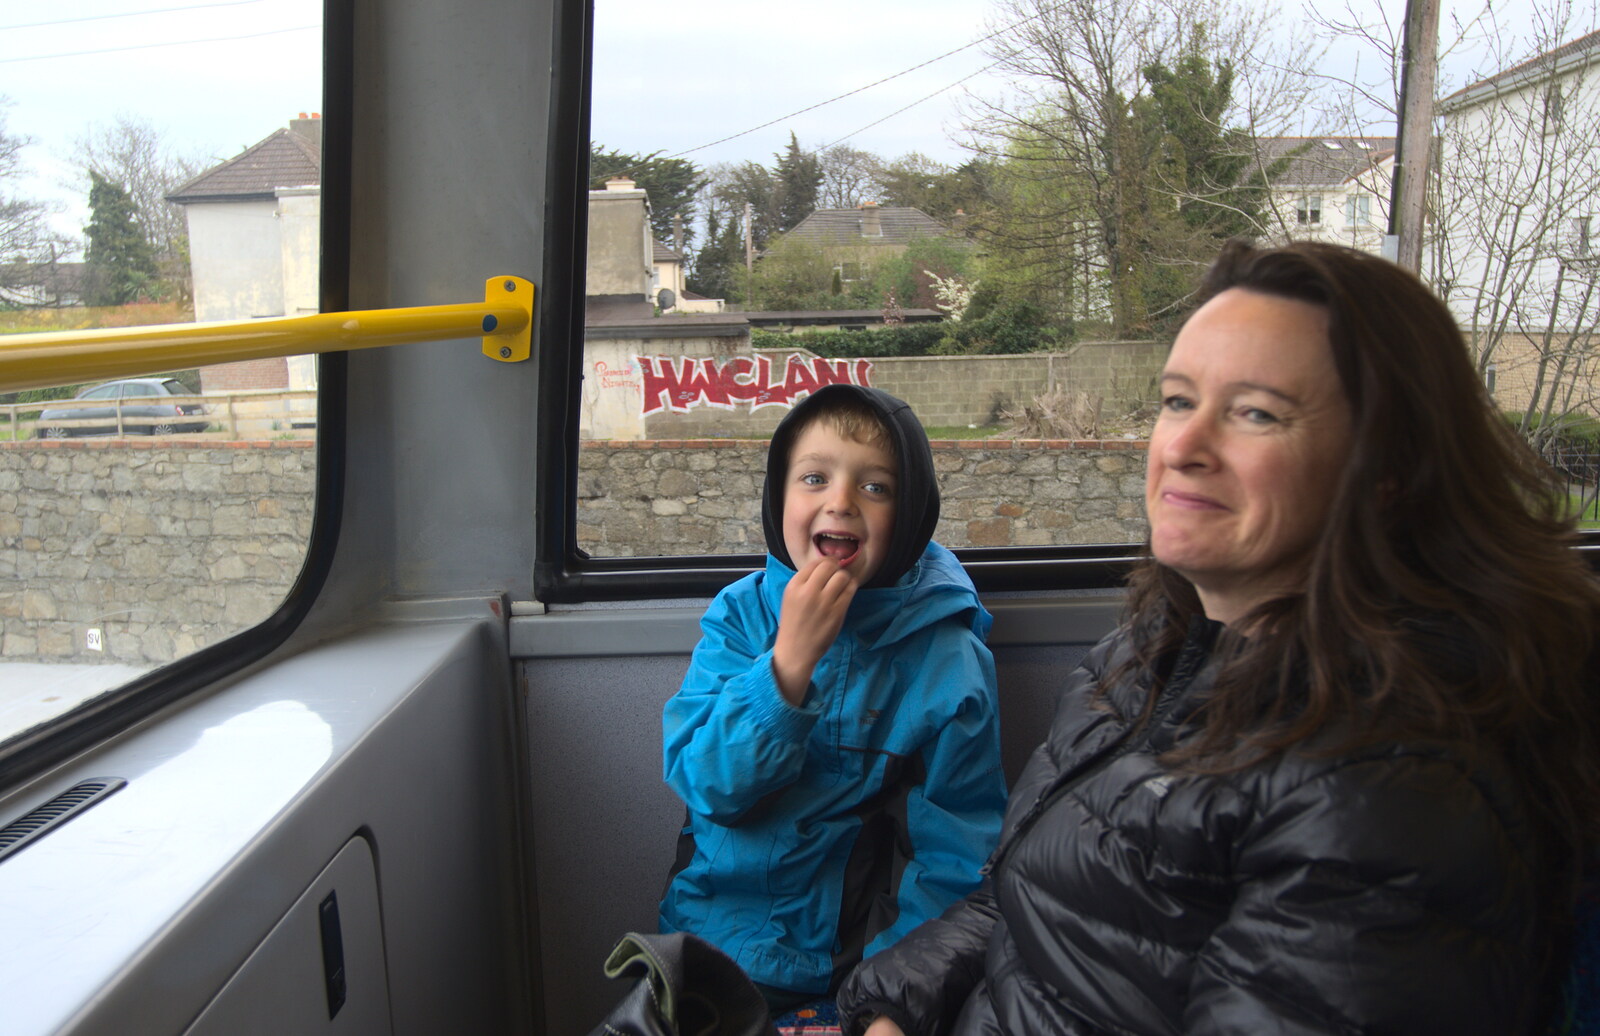 Fred and Evelyn on the bus to Dun Laoghaire from Temple Bar and Dun Laoghaire, Dublin, Ireland - 16th April 2015